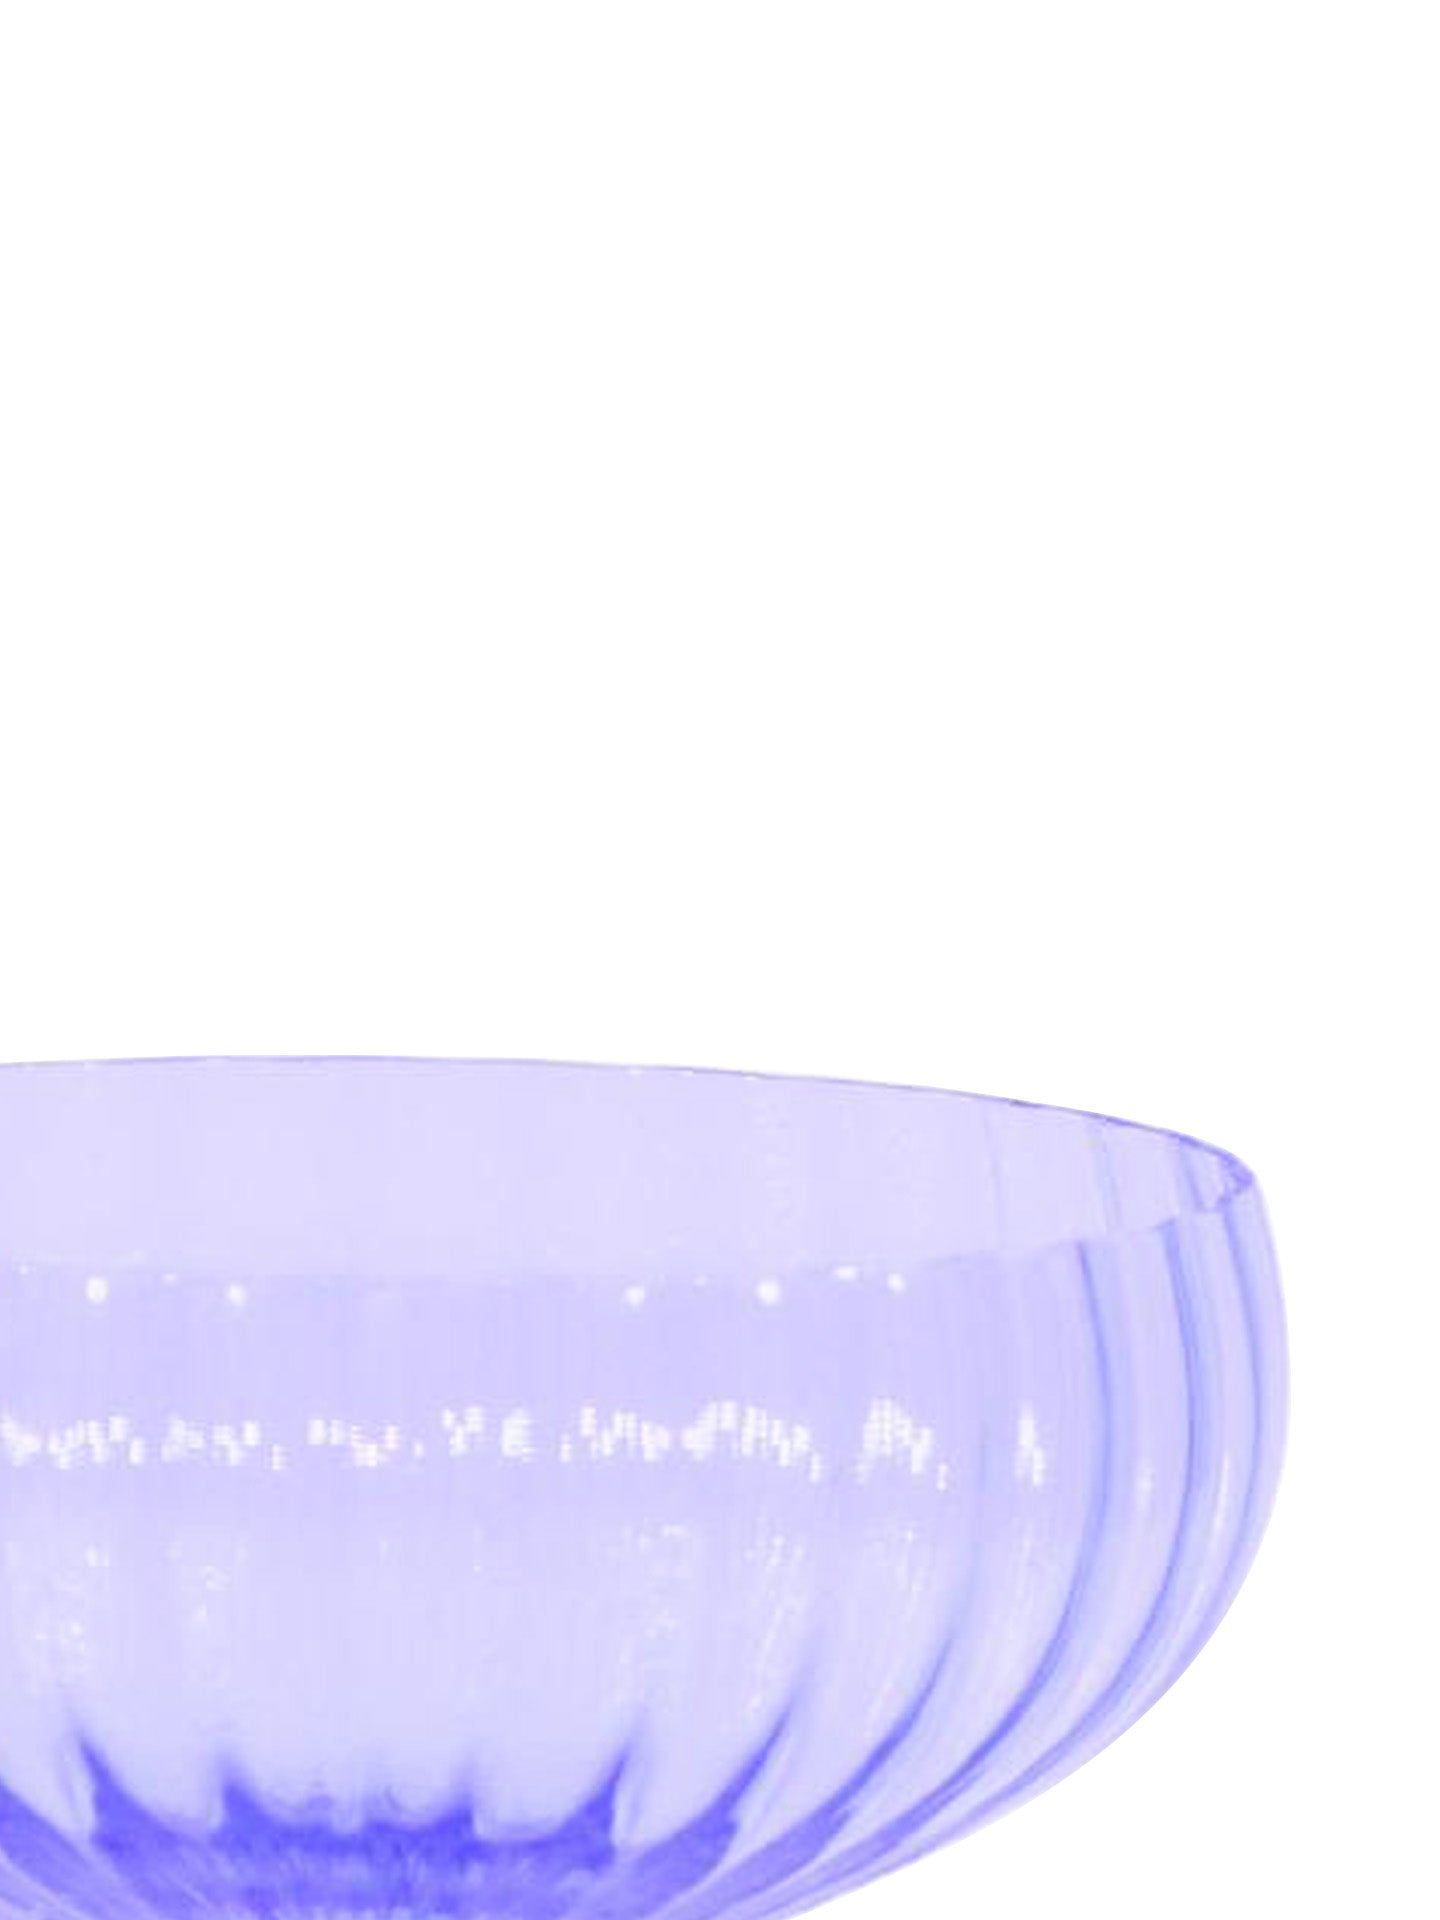 The Danish Anna von Lipa's champagne coupe in periwinkle blue Lilla Alex is lead-free crystal glass where the lead has been replaced with non-toxic barium oxide.